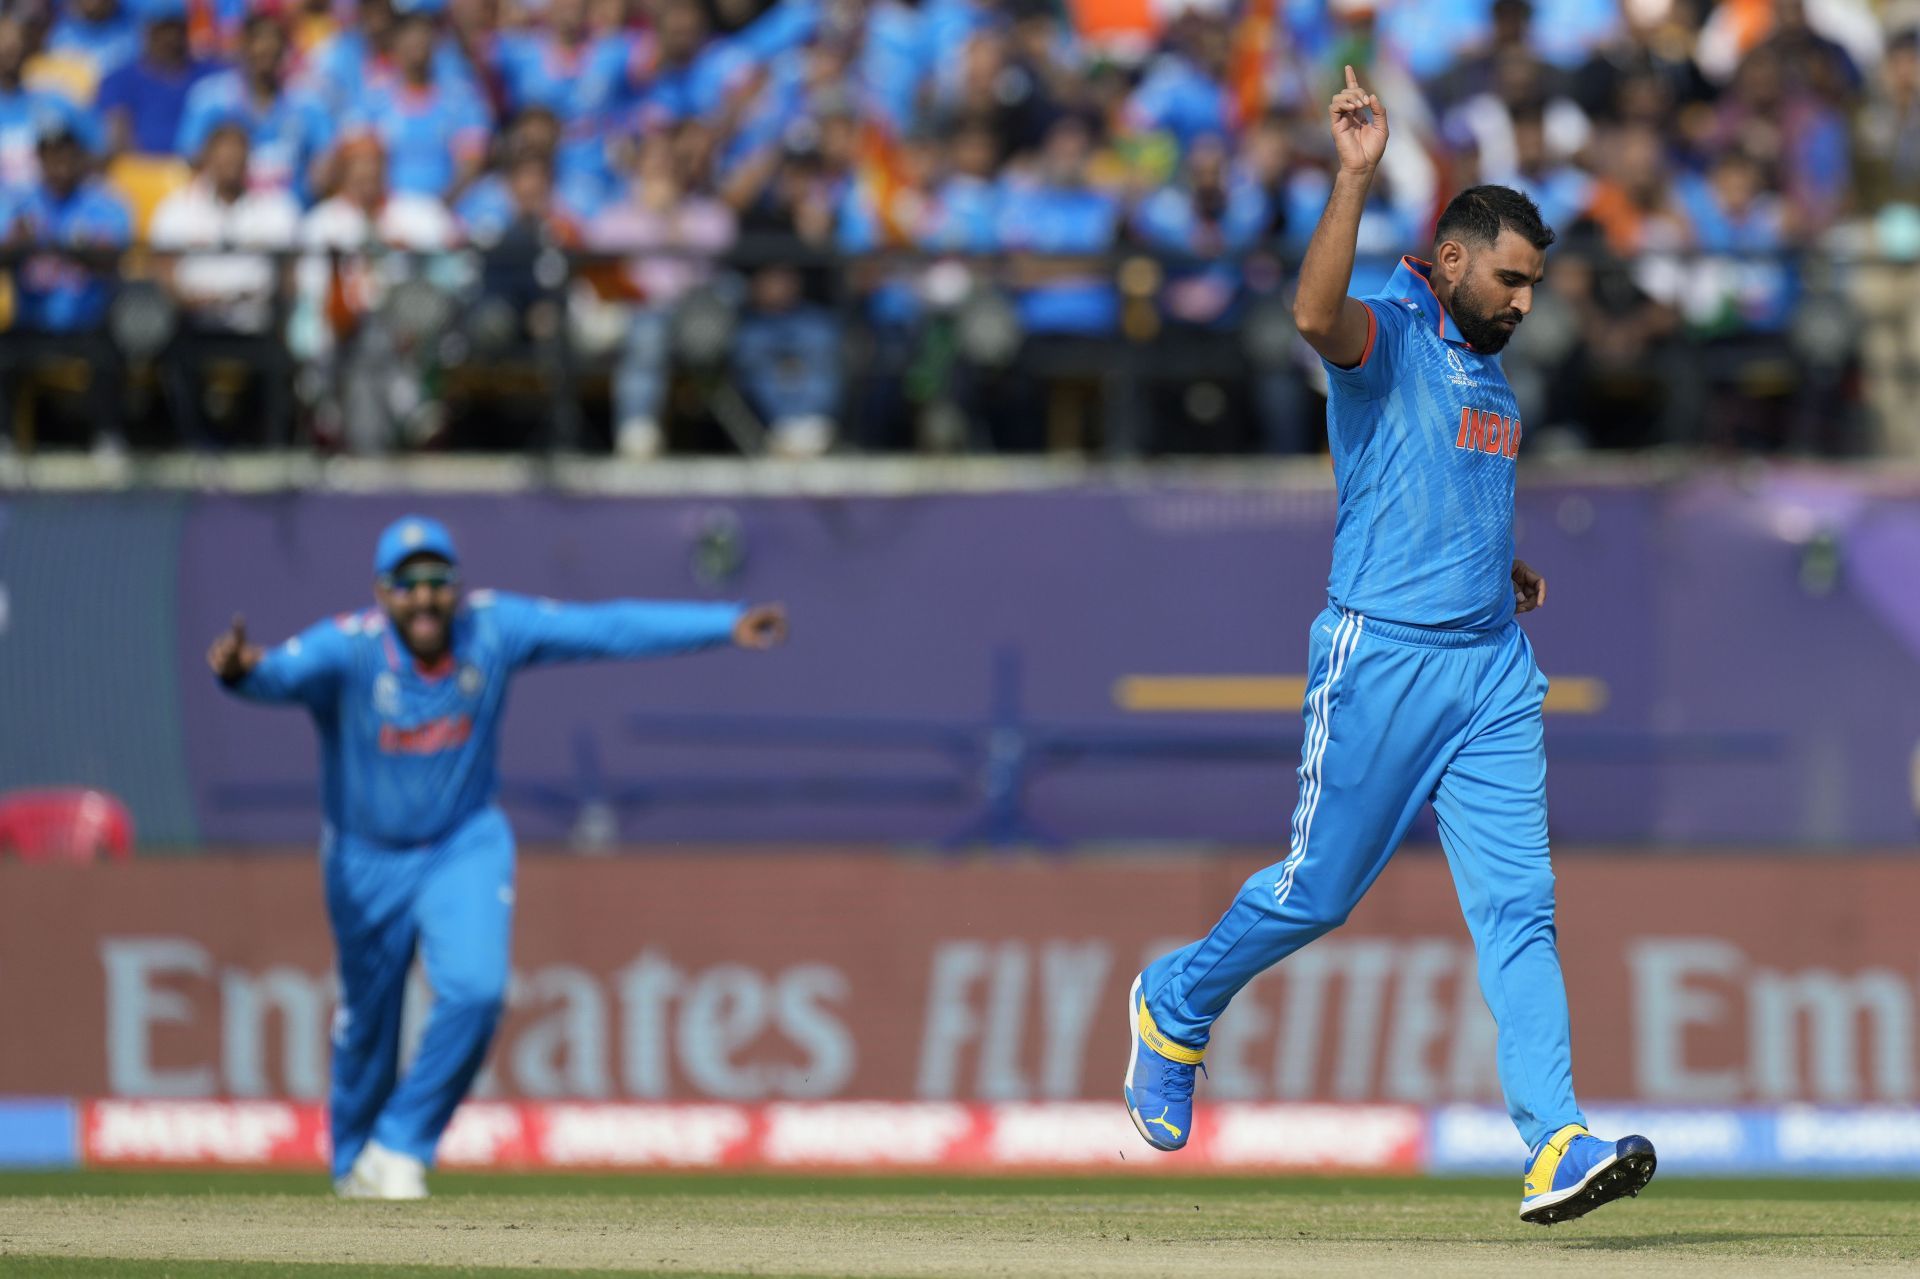 Mohammed Shami was awarded the Player of the Match for his penetrative spell. [P/C: AP]